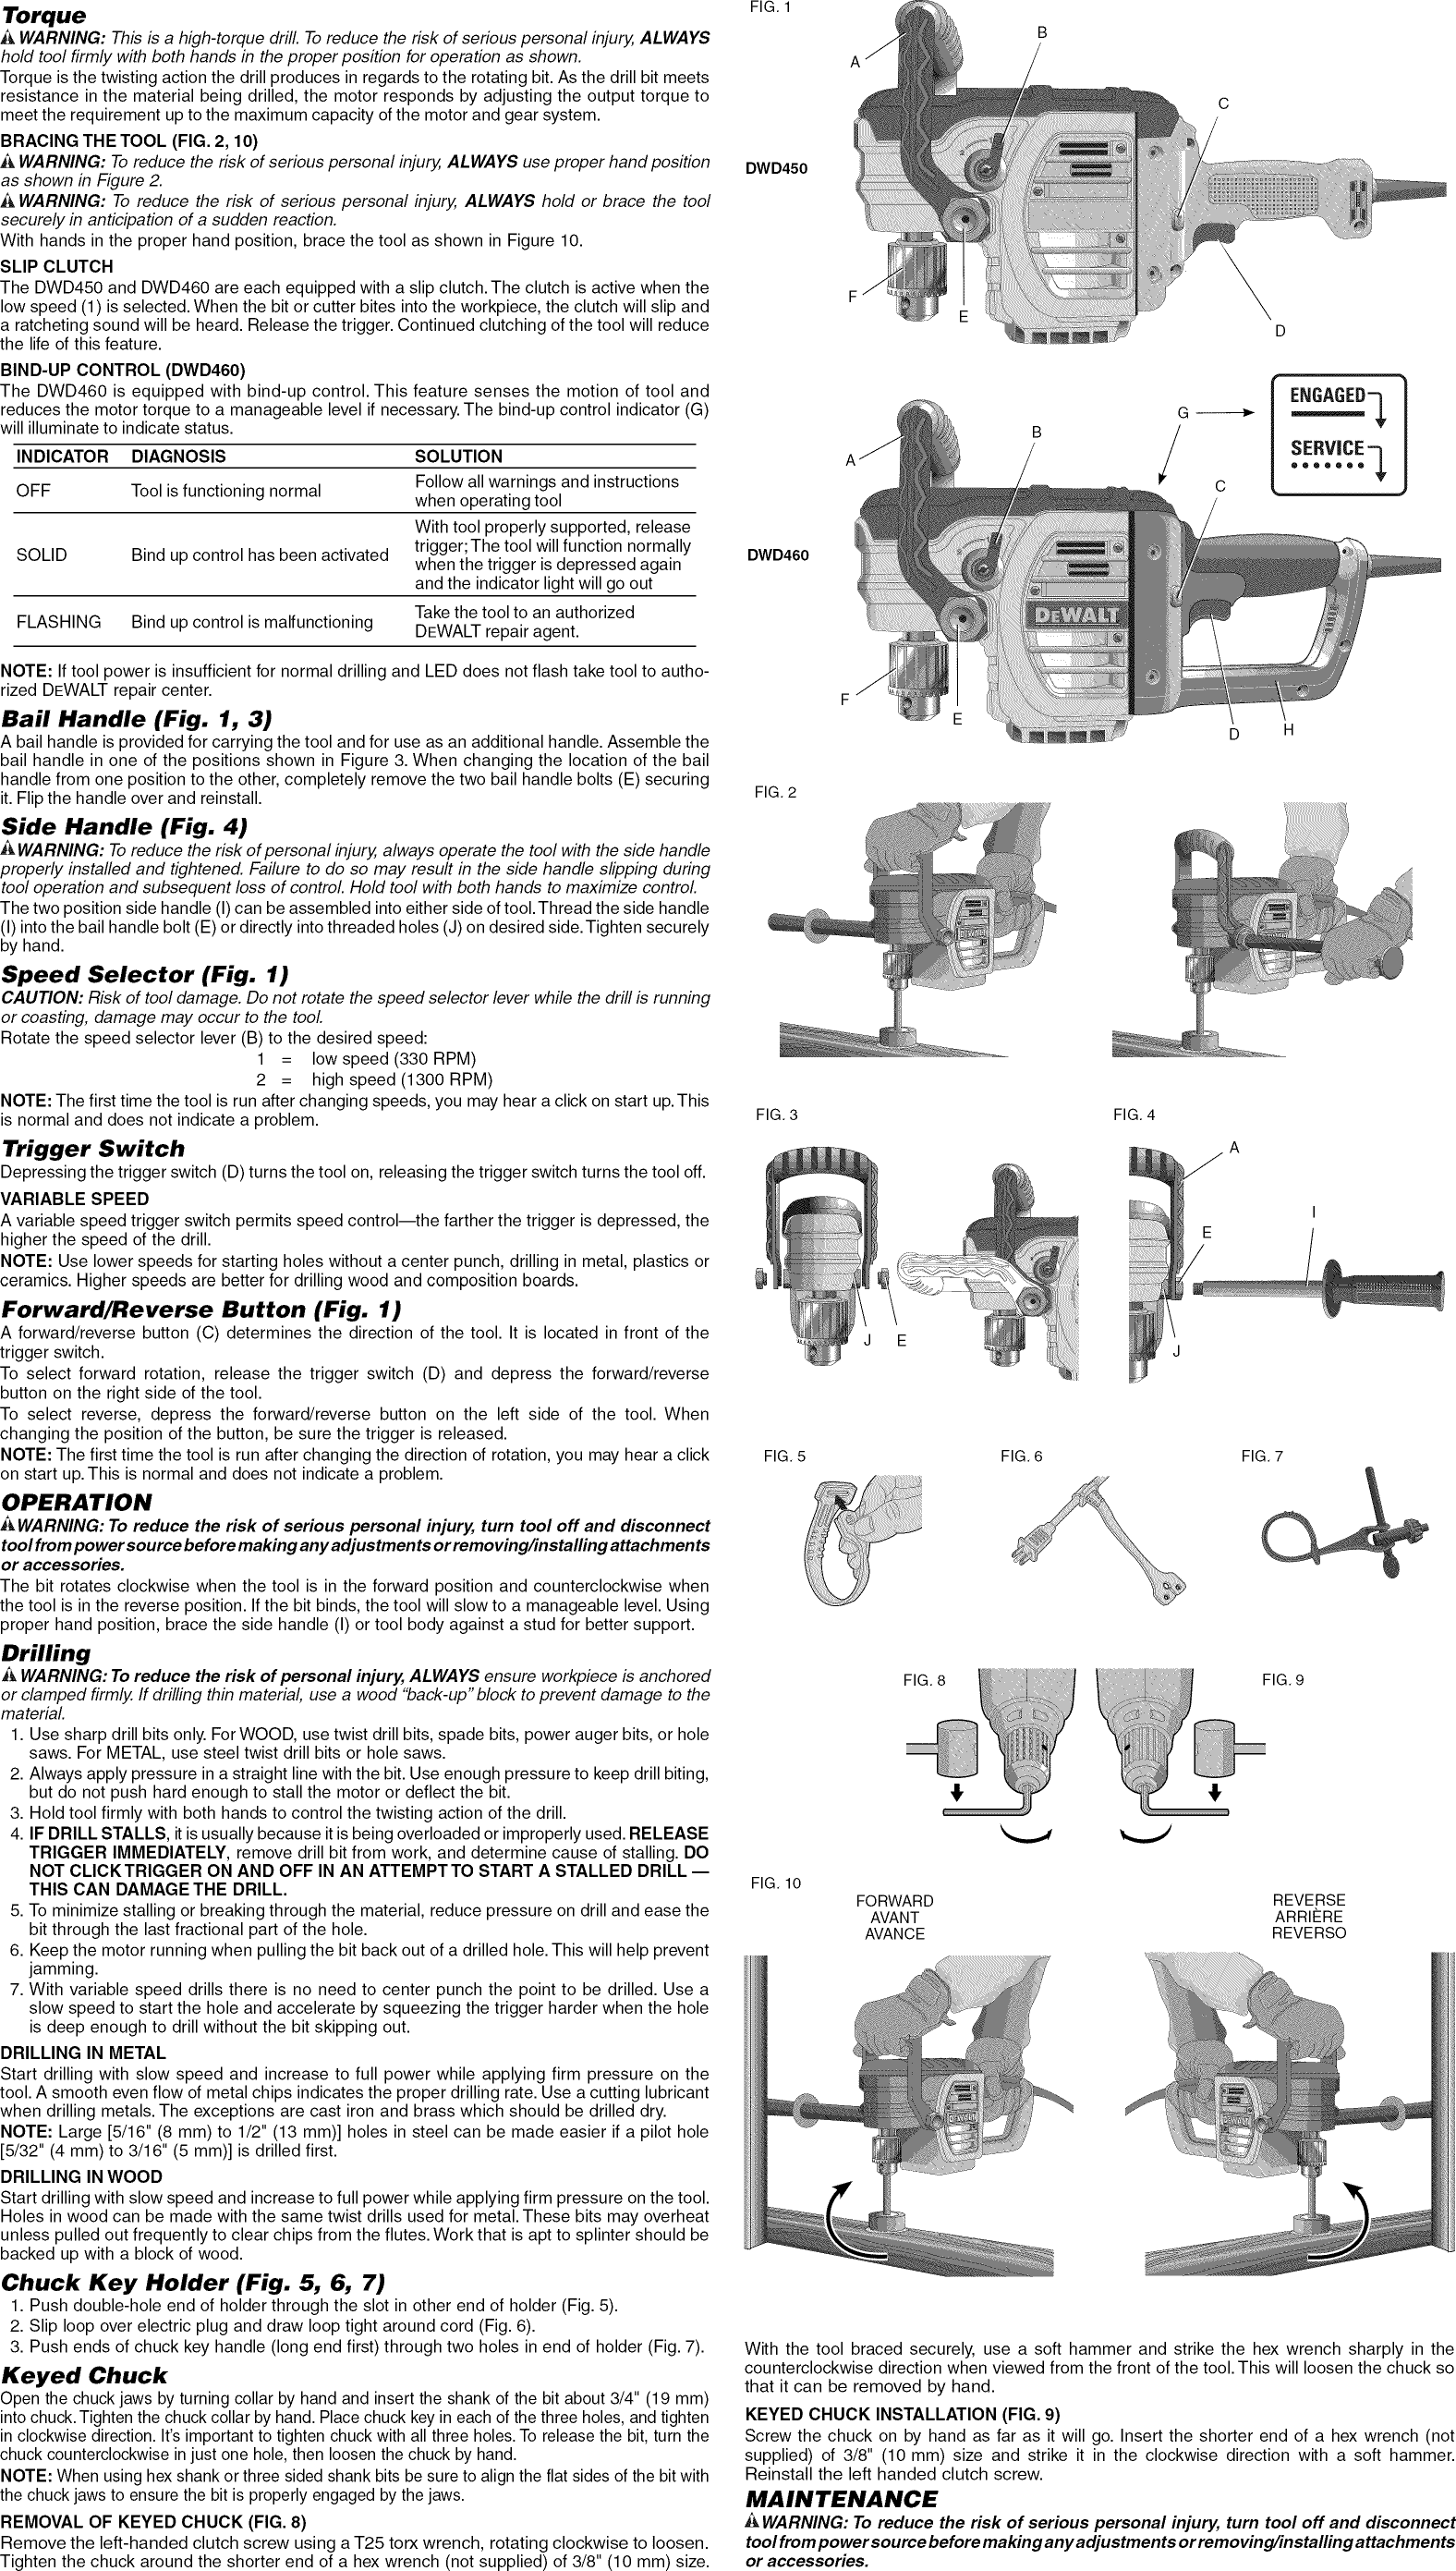 Page 2 of 7 - Dewalt DWD450 TYPE 1 User Manual  DRILL DRIVER - Manuals And Guides 1407104L